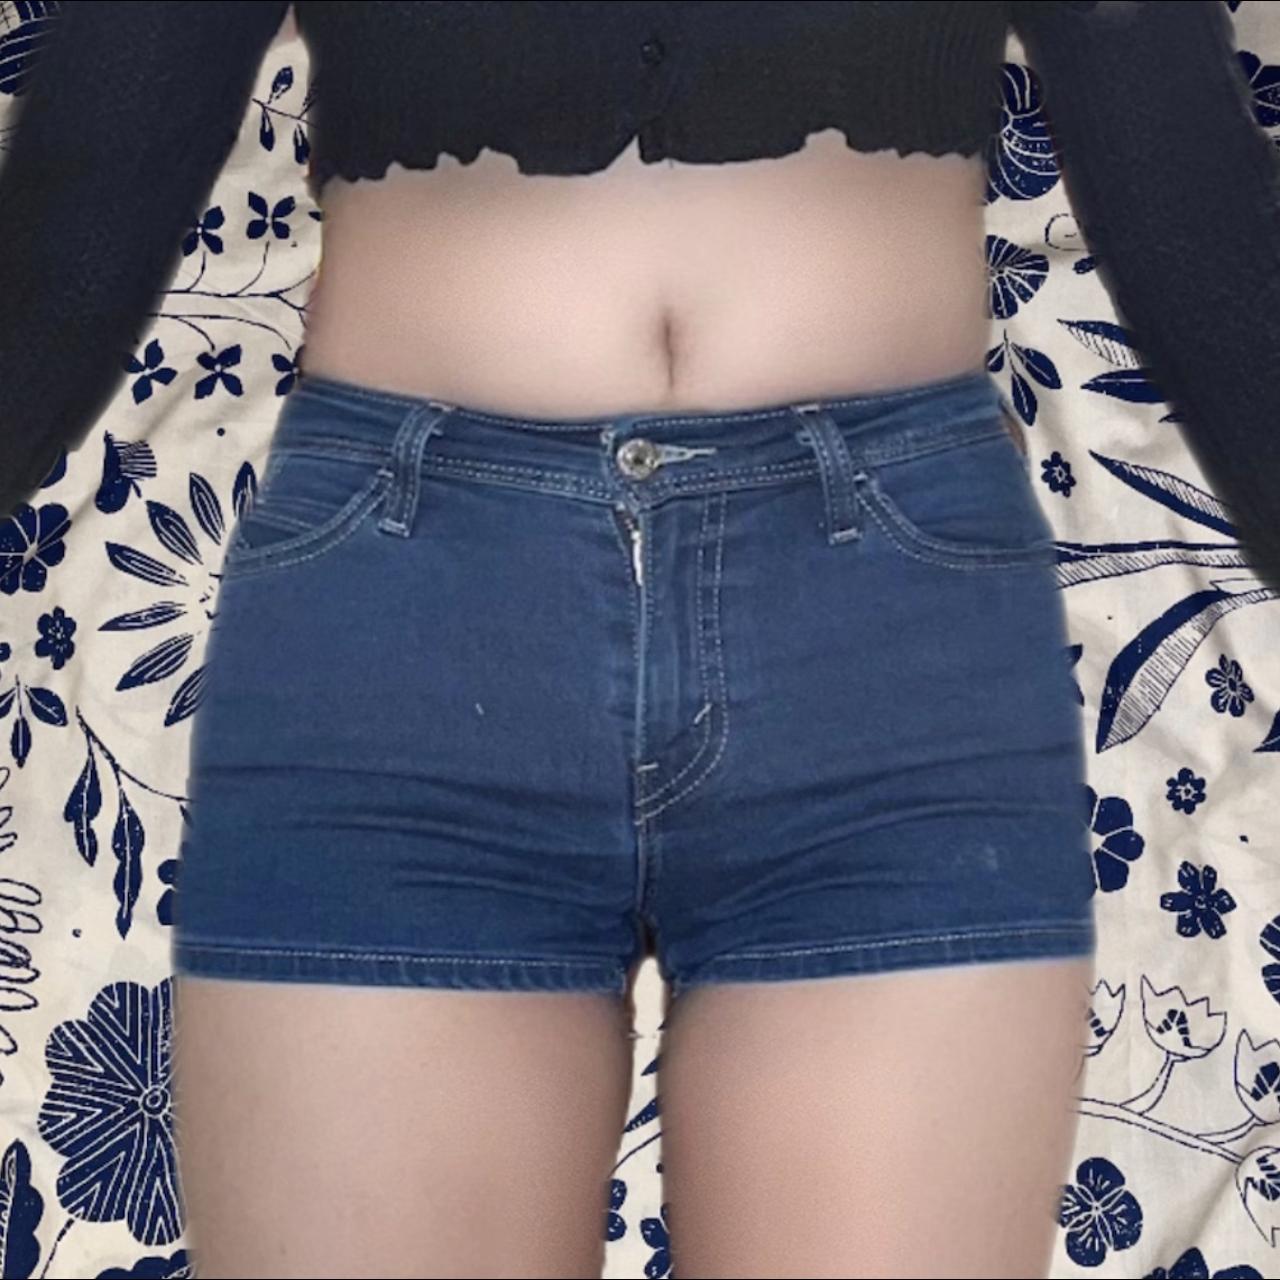 Levi's Women's Navy and Blue Shorts (4)